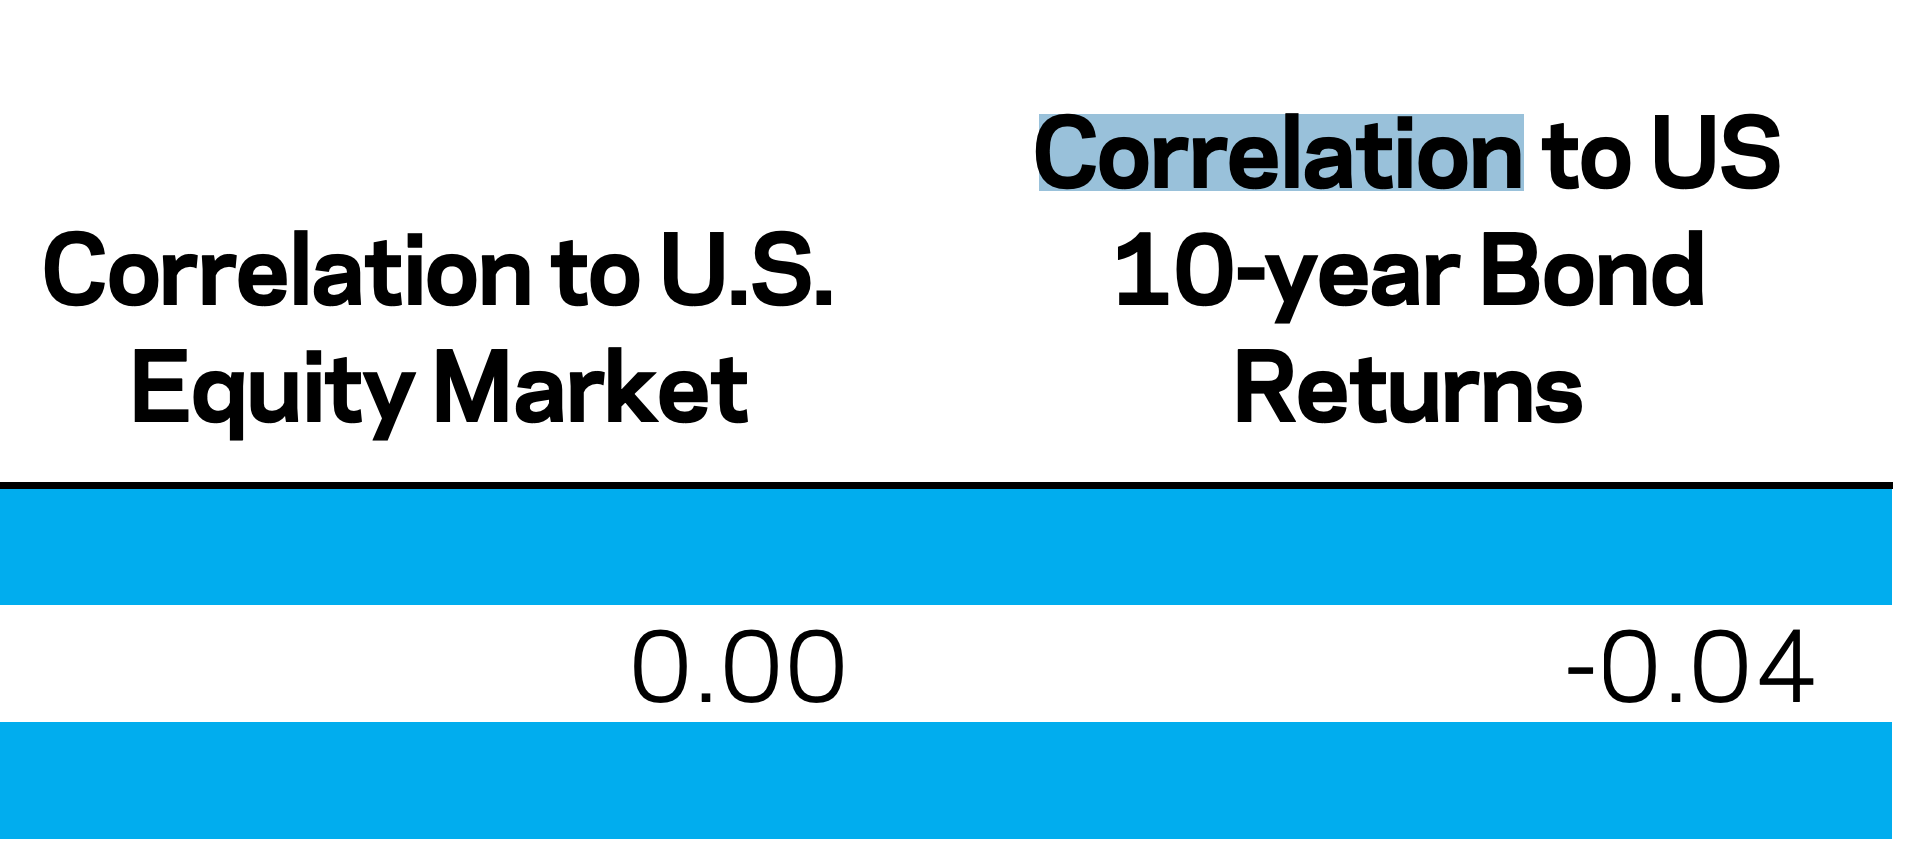 Managed Futures Trend Following Correlations to US Equity Markets and Correlation To US 10 Year Bond Returns